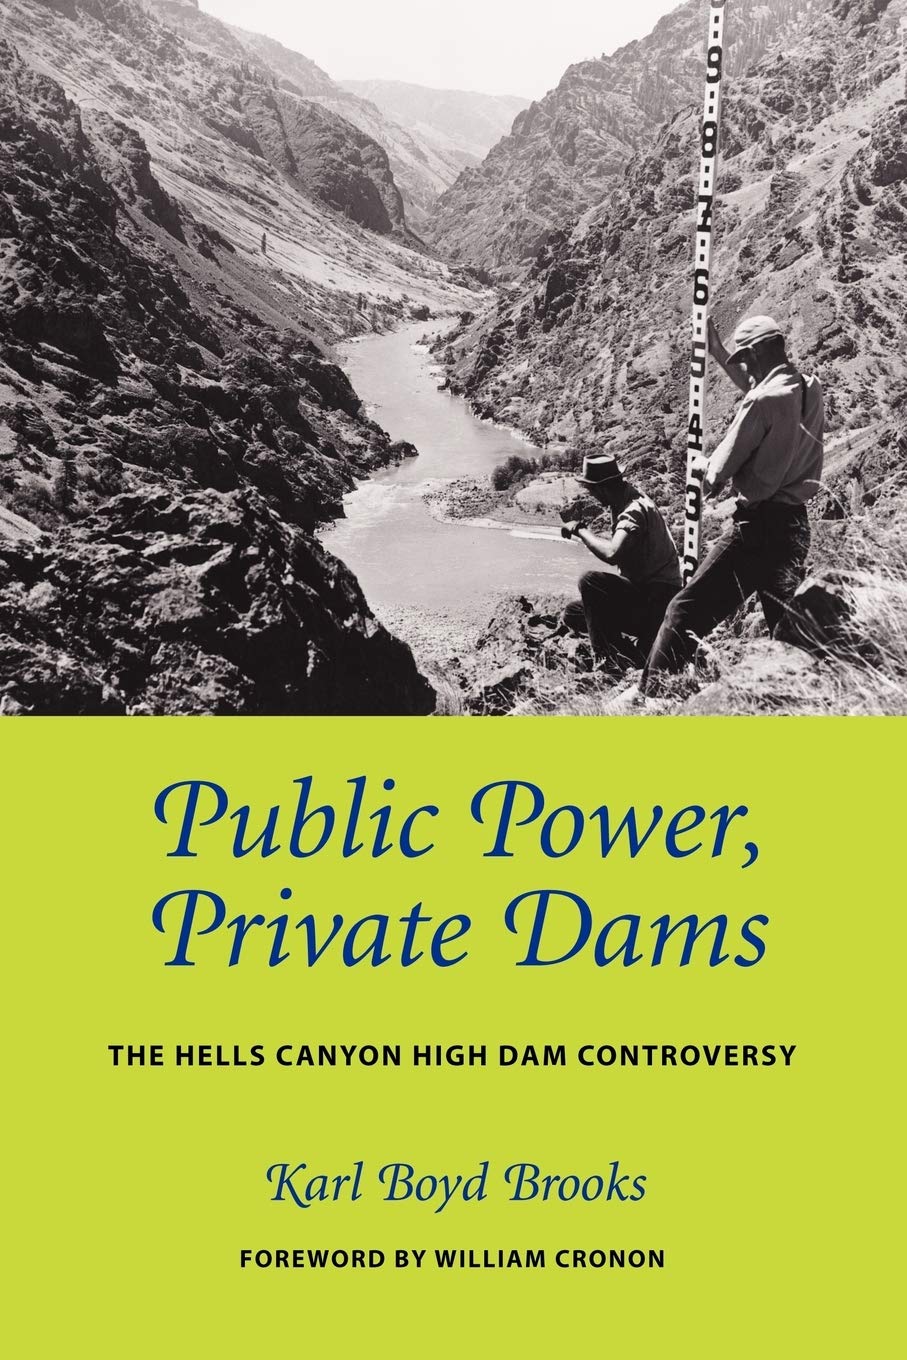 Public power, private dams: The Hells Canyon High Dam controversy (book cover)